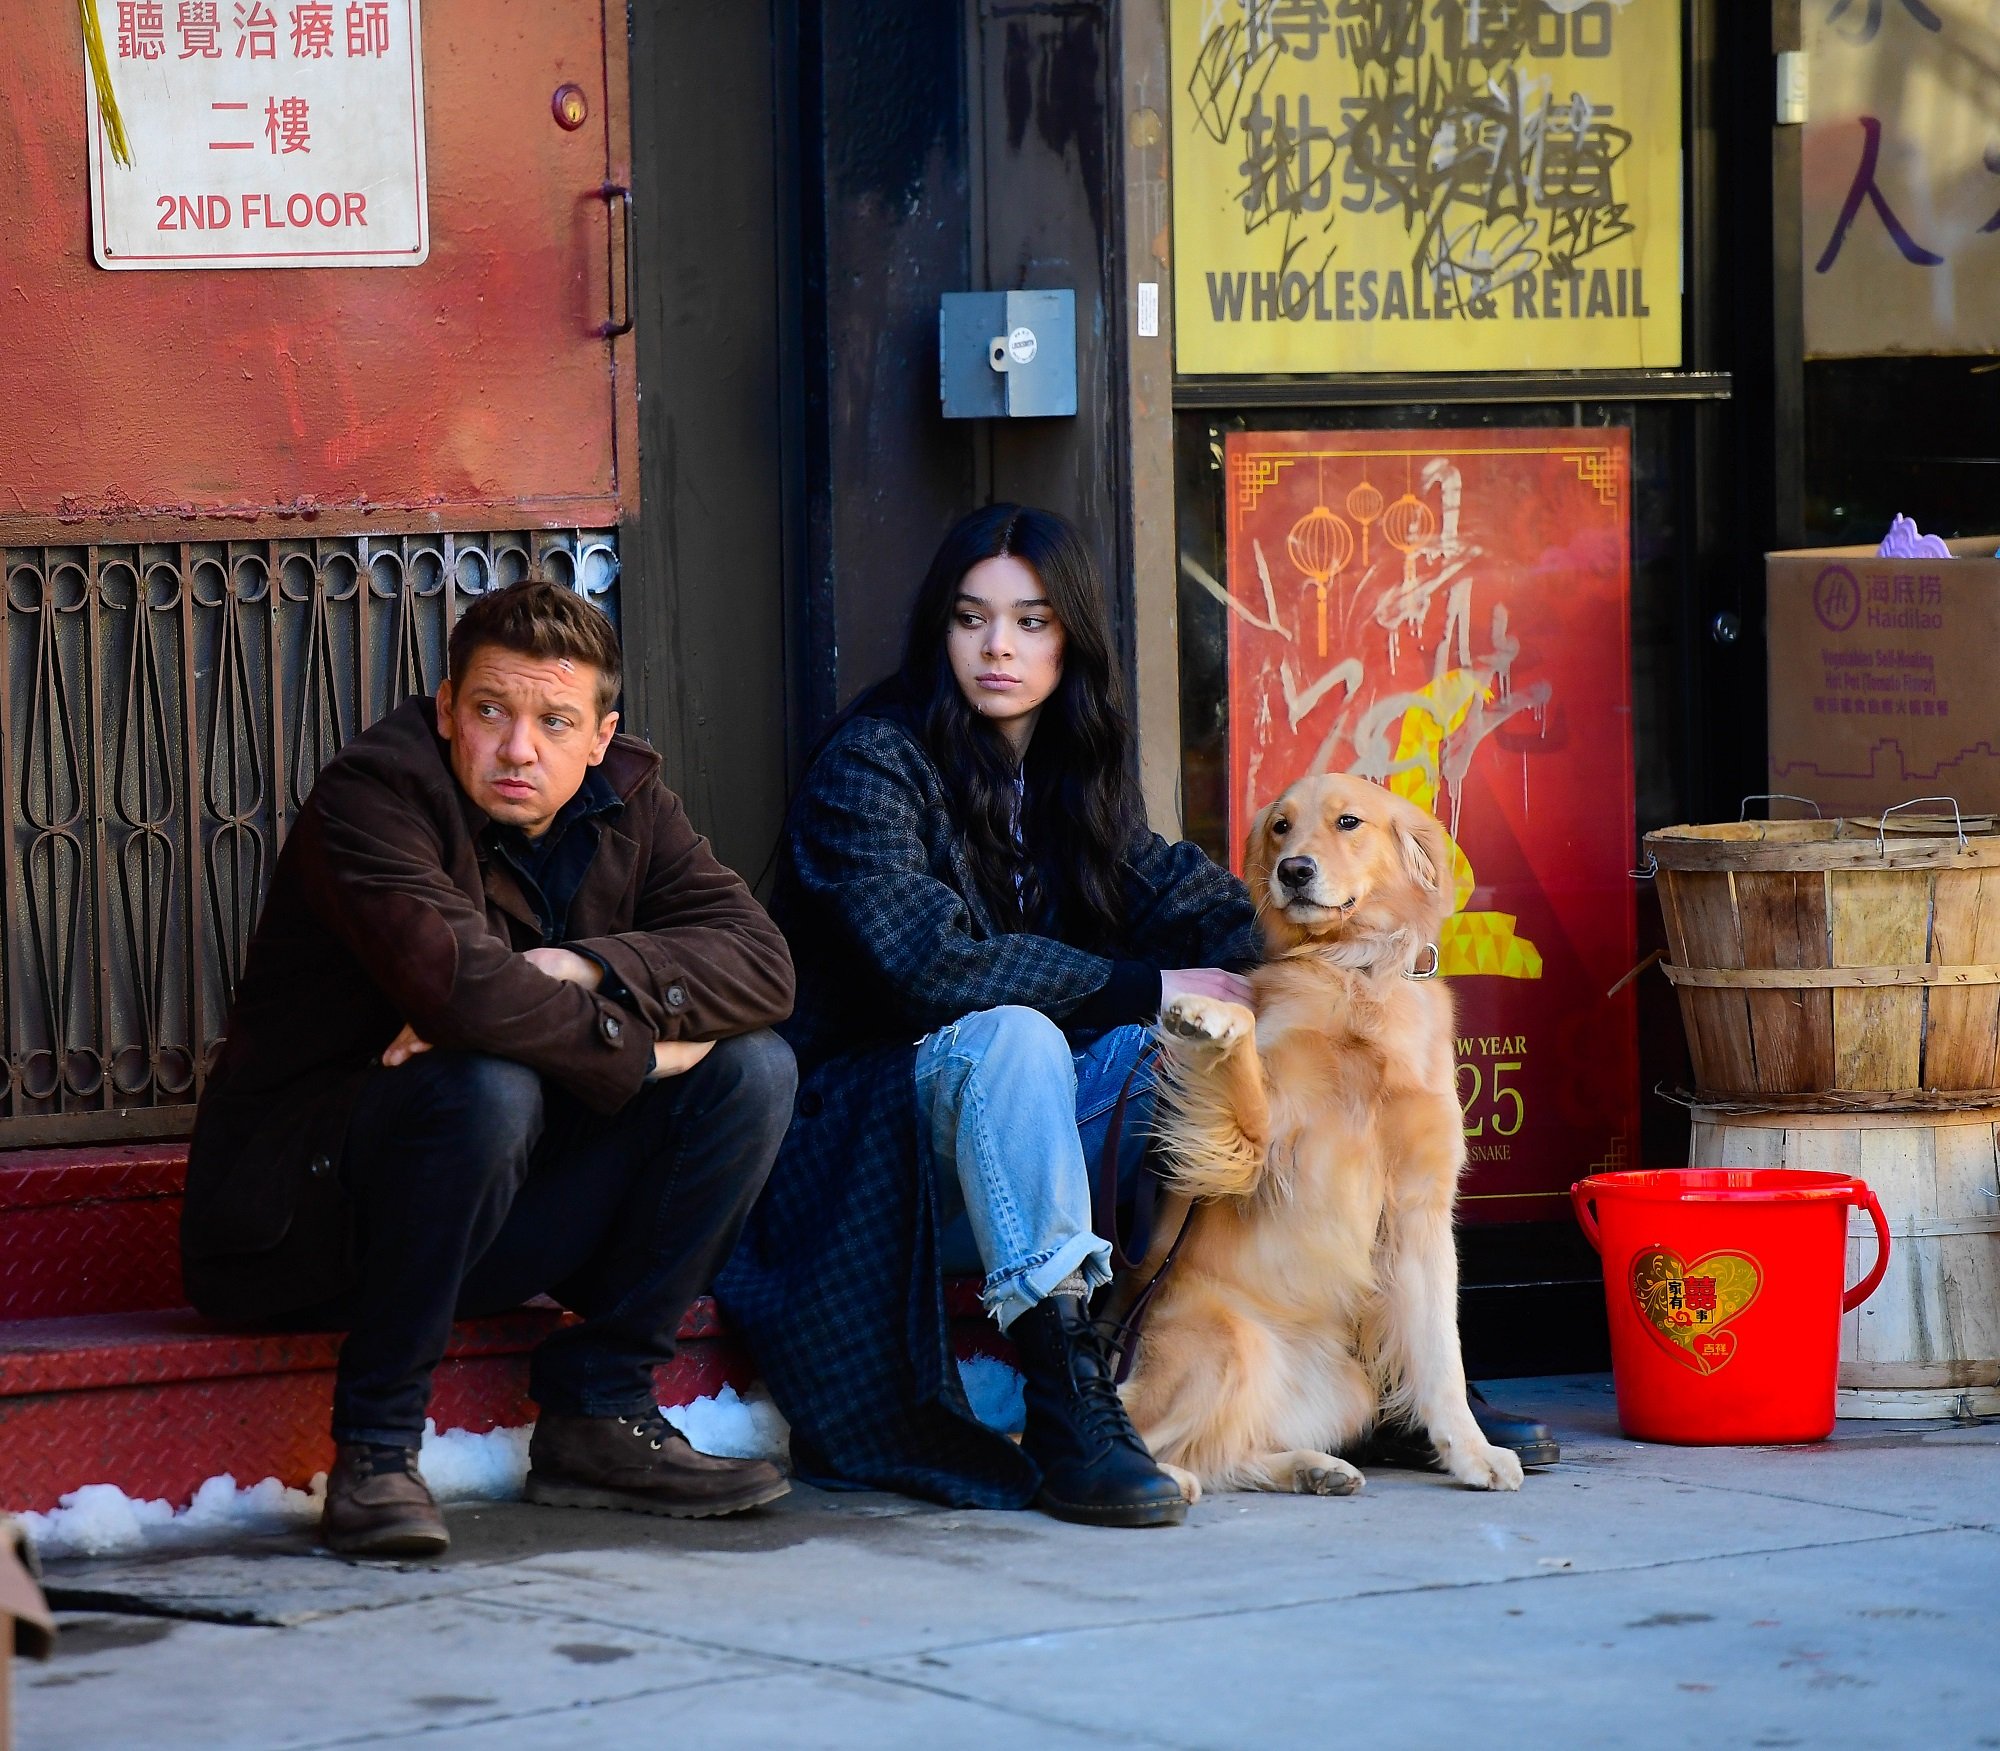 Jeremy Renner and Hailee Steinfeld are seen on the set of 'Hawkeye' in Chinatown on December 3, 2020 in New York City.